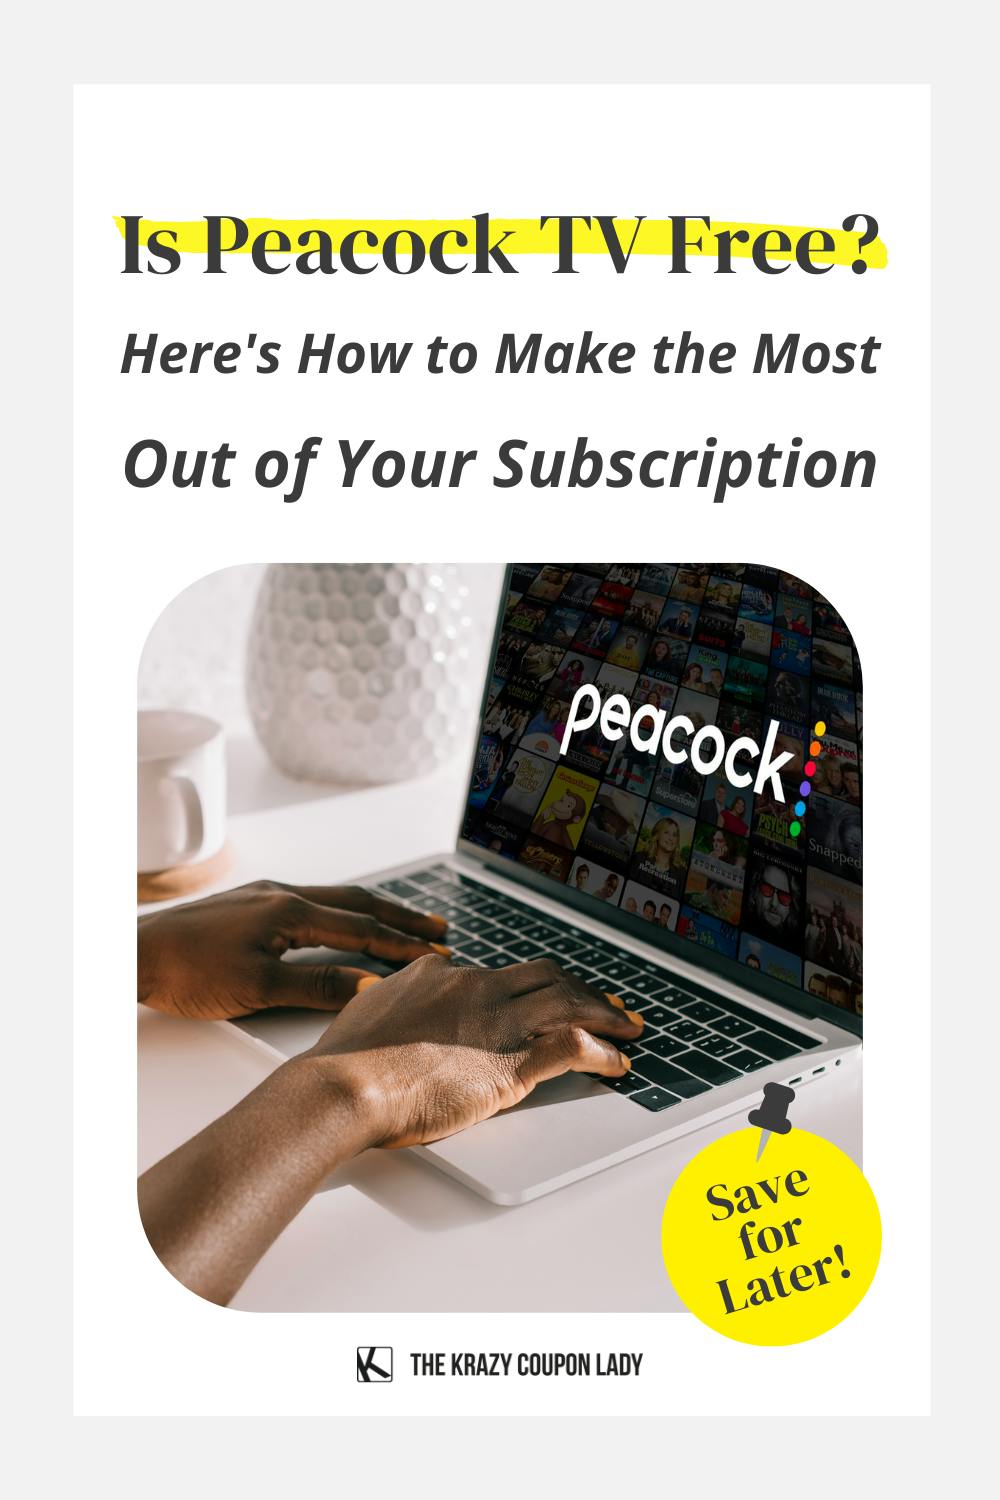 Is Peacock TV Free? Here's How to Make the Most of Your Subscription